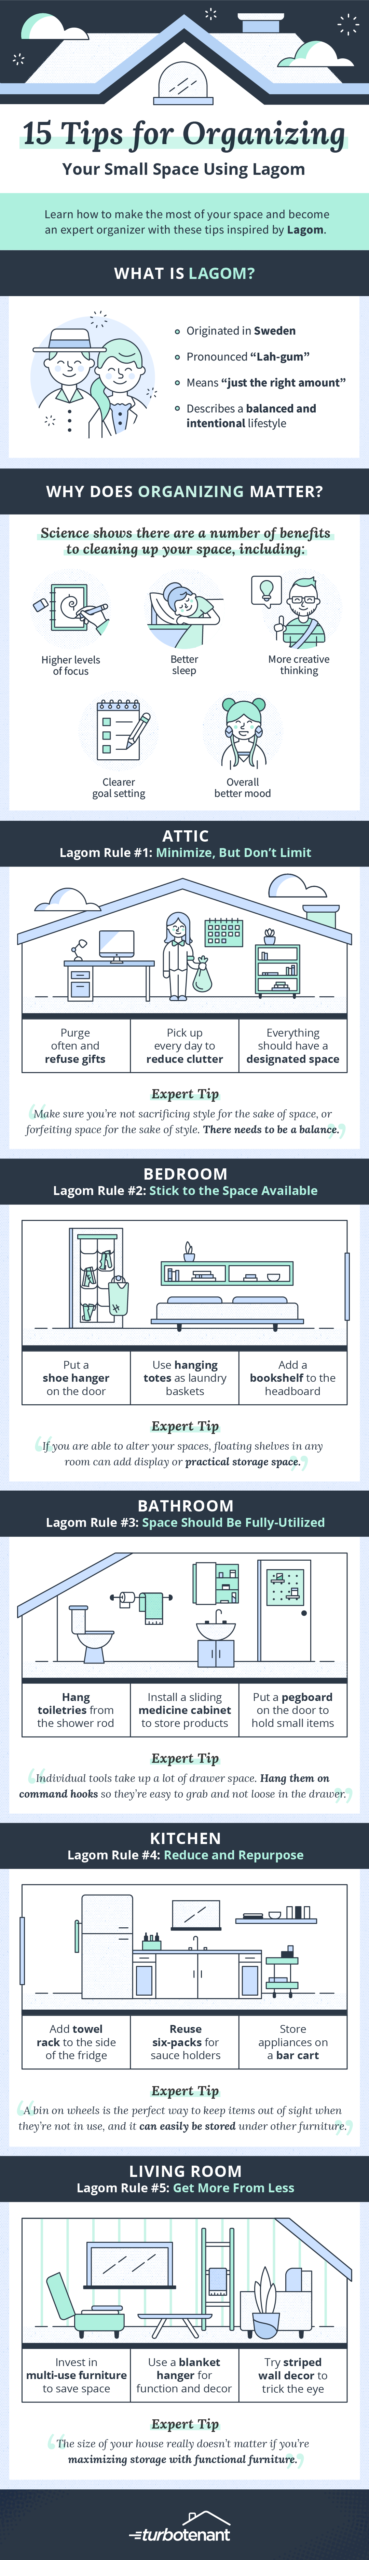 how to use lagom to organize small spaces